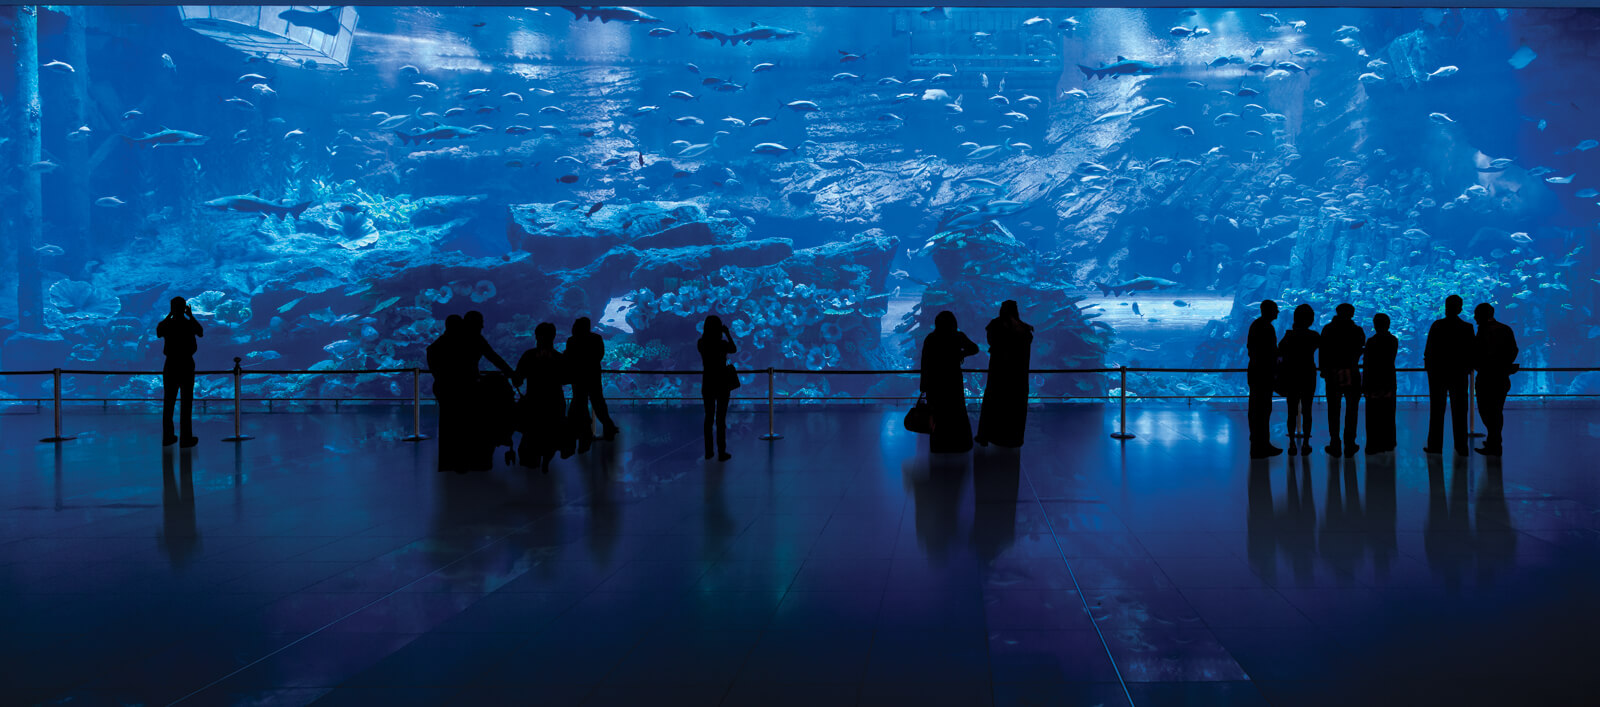 The mind-boggling underwater world gets revealed in the Dubai Aquarium and Underwater Zoo